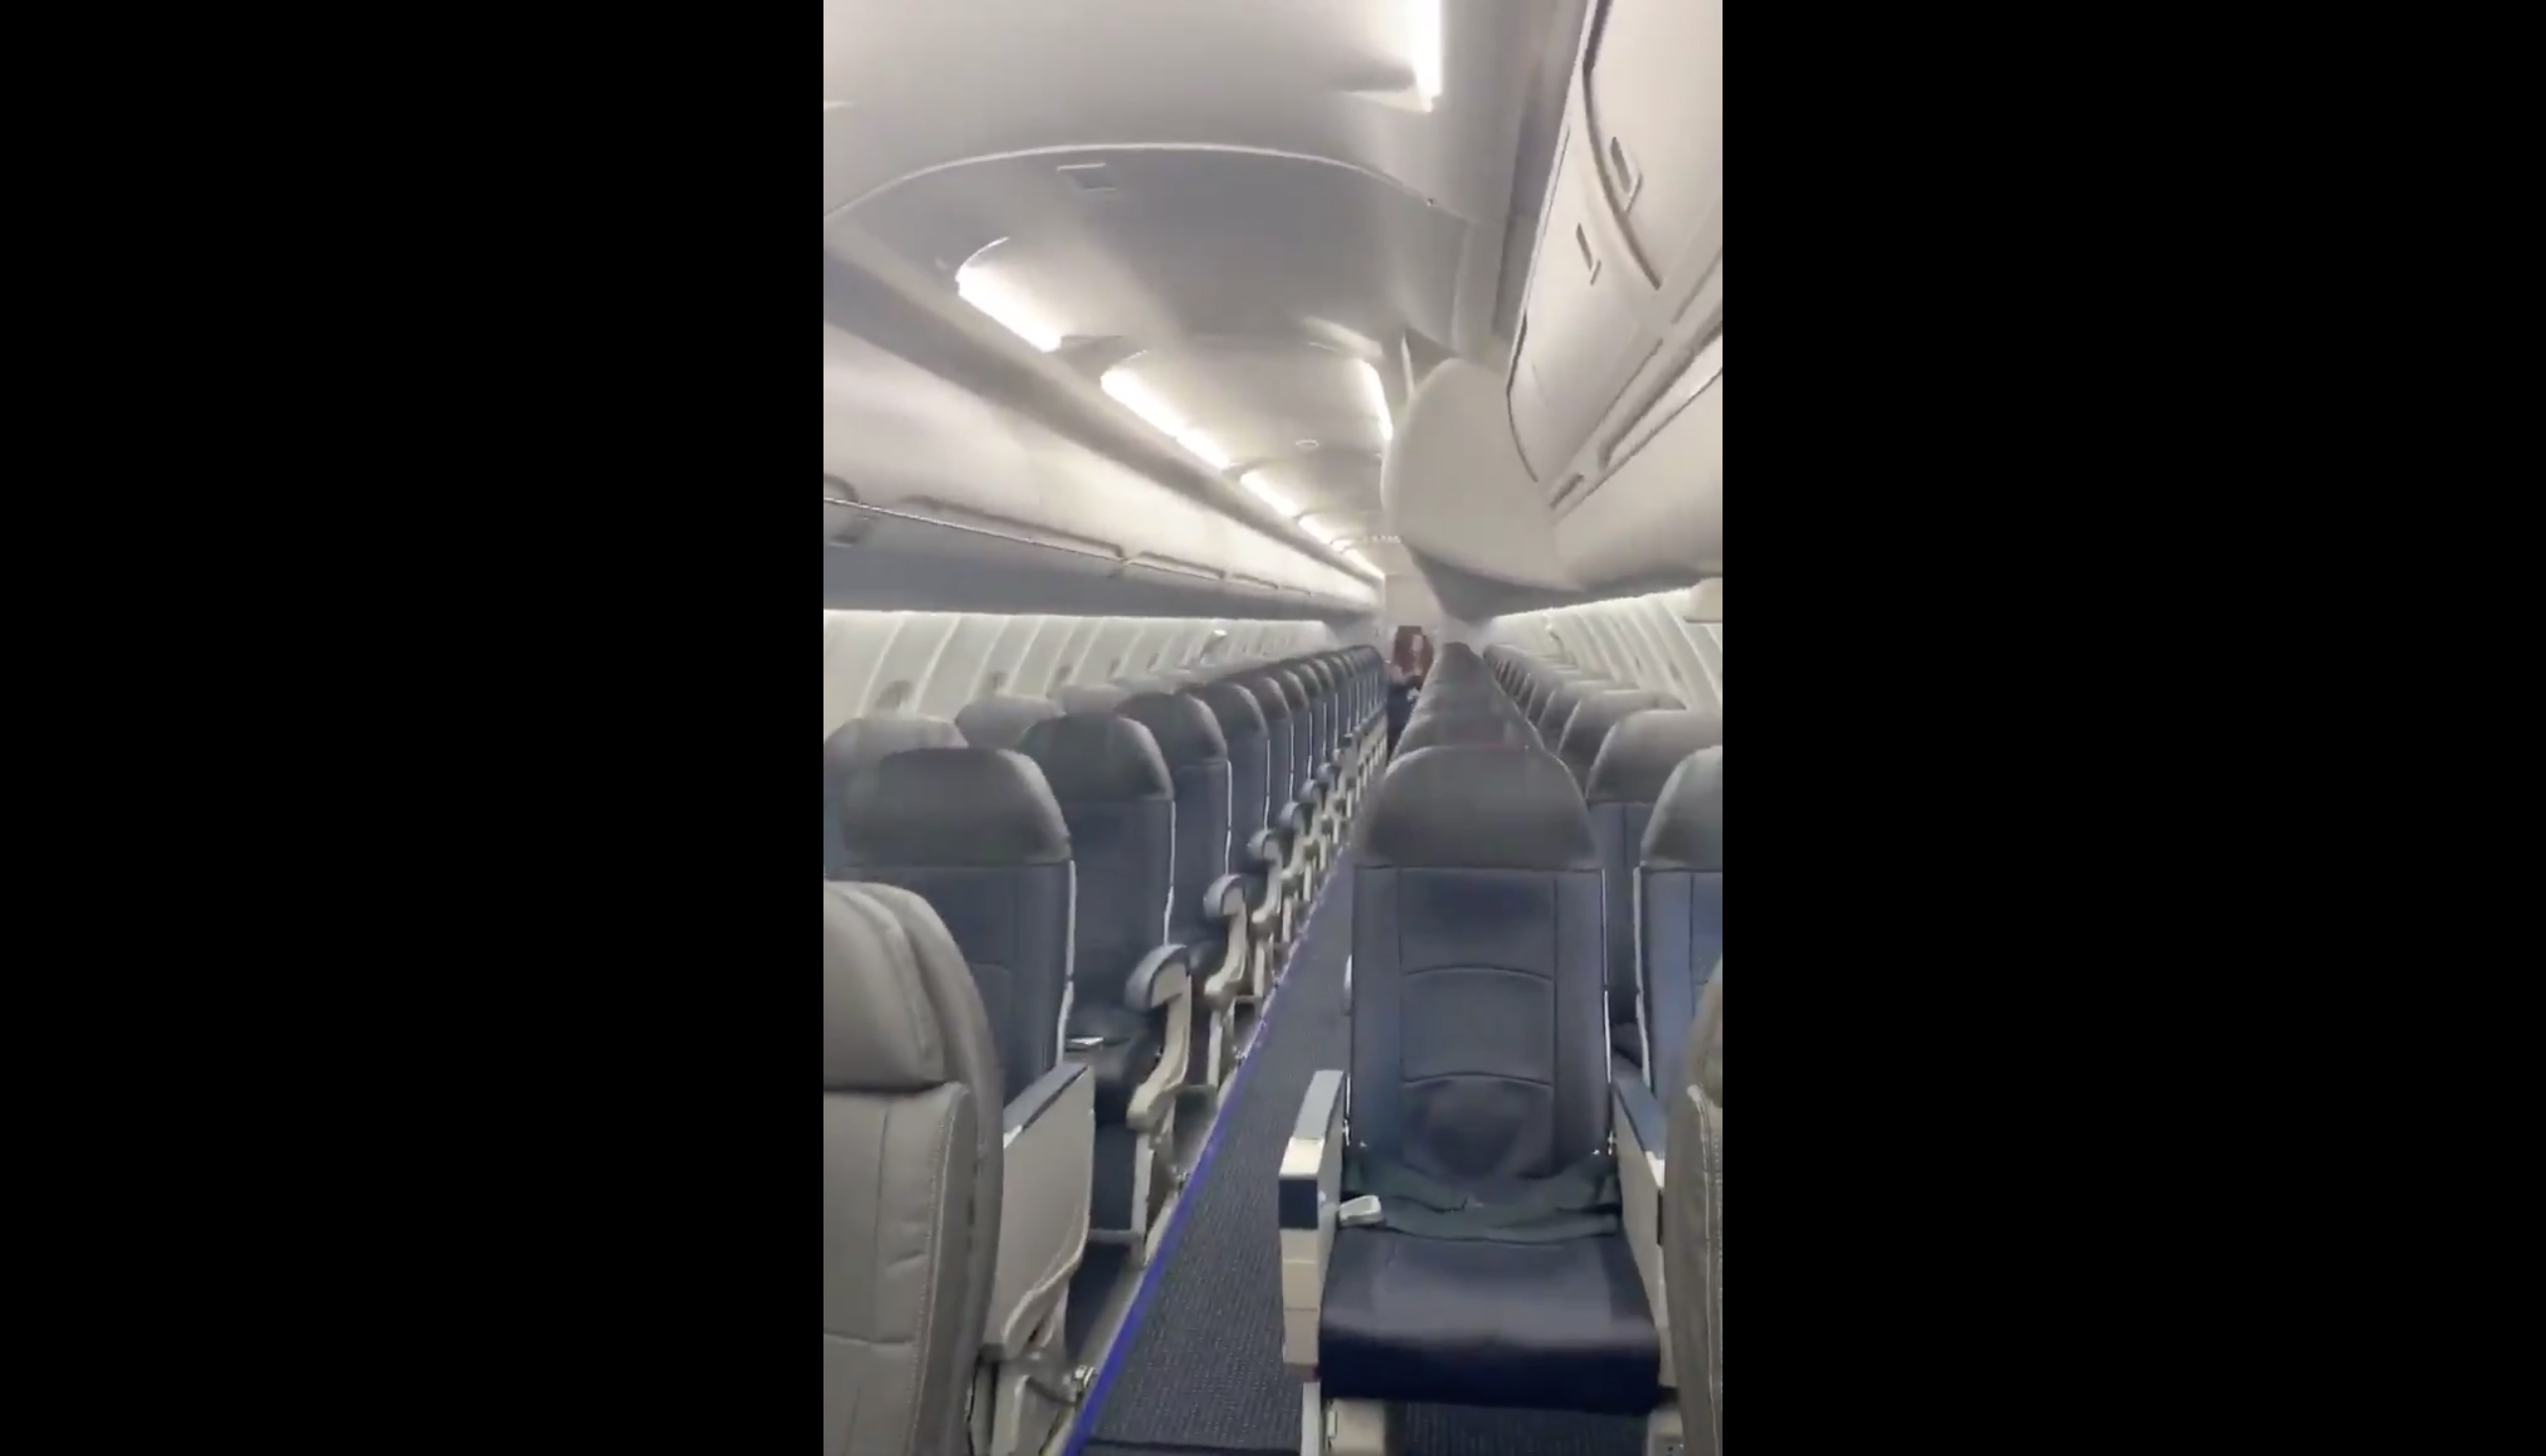 PHOTO: Last week, Vincent Peone was the only customer on his Delta flight from Aspen, Colorado, to Salt Lake City, Utah. He chronicled what the pilot referred to as his "private jet" experience in a video he posted yesterday to Twitter.